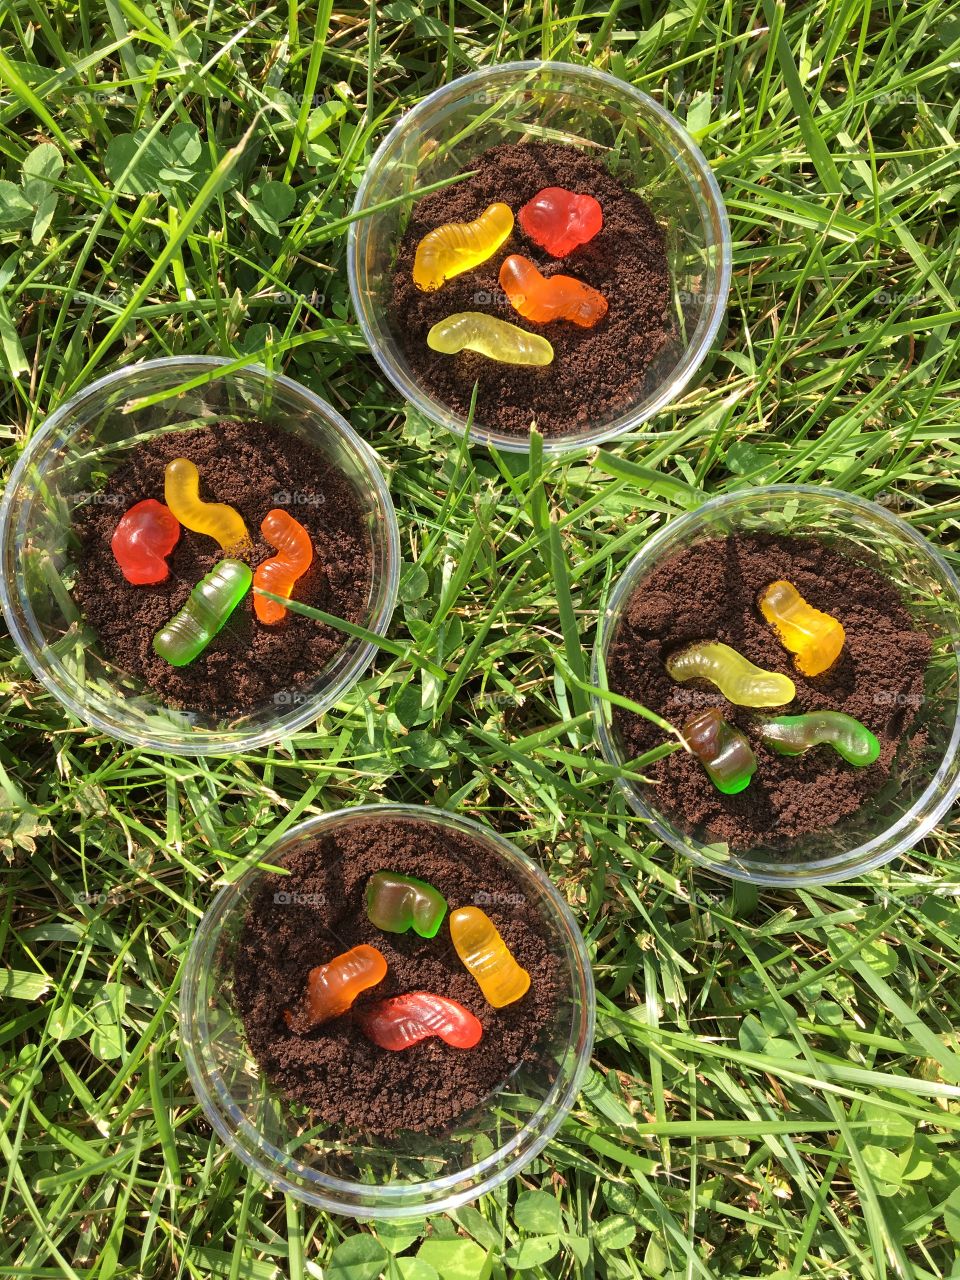 Dirt Cups made of chocolate pudding, cookie crumbles and gummy 🐛 